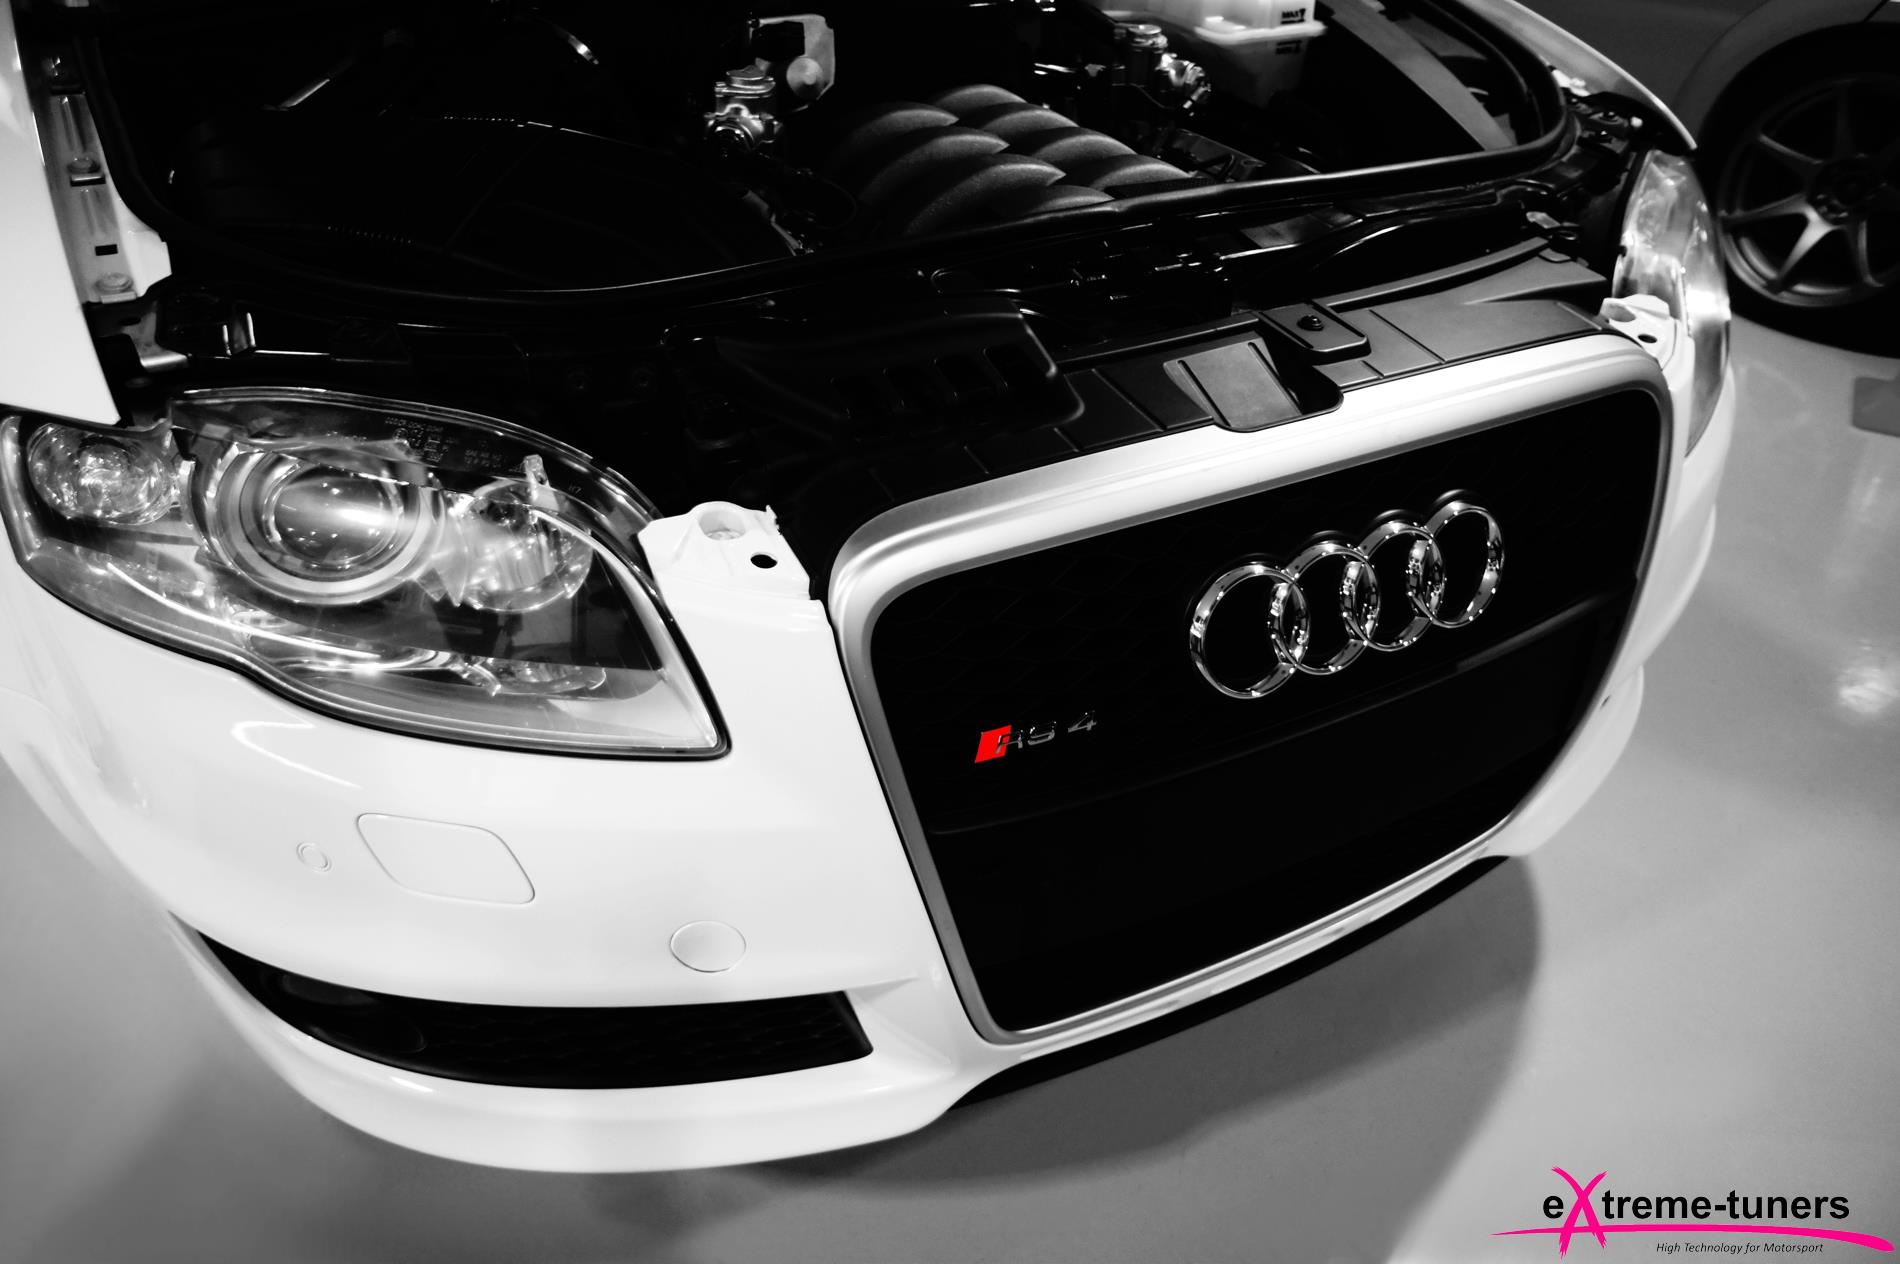 Audi rs4 turbo project, 